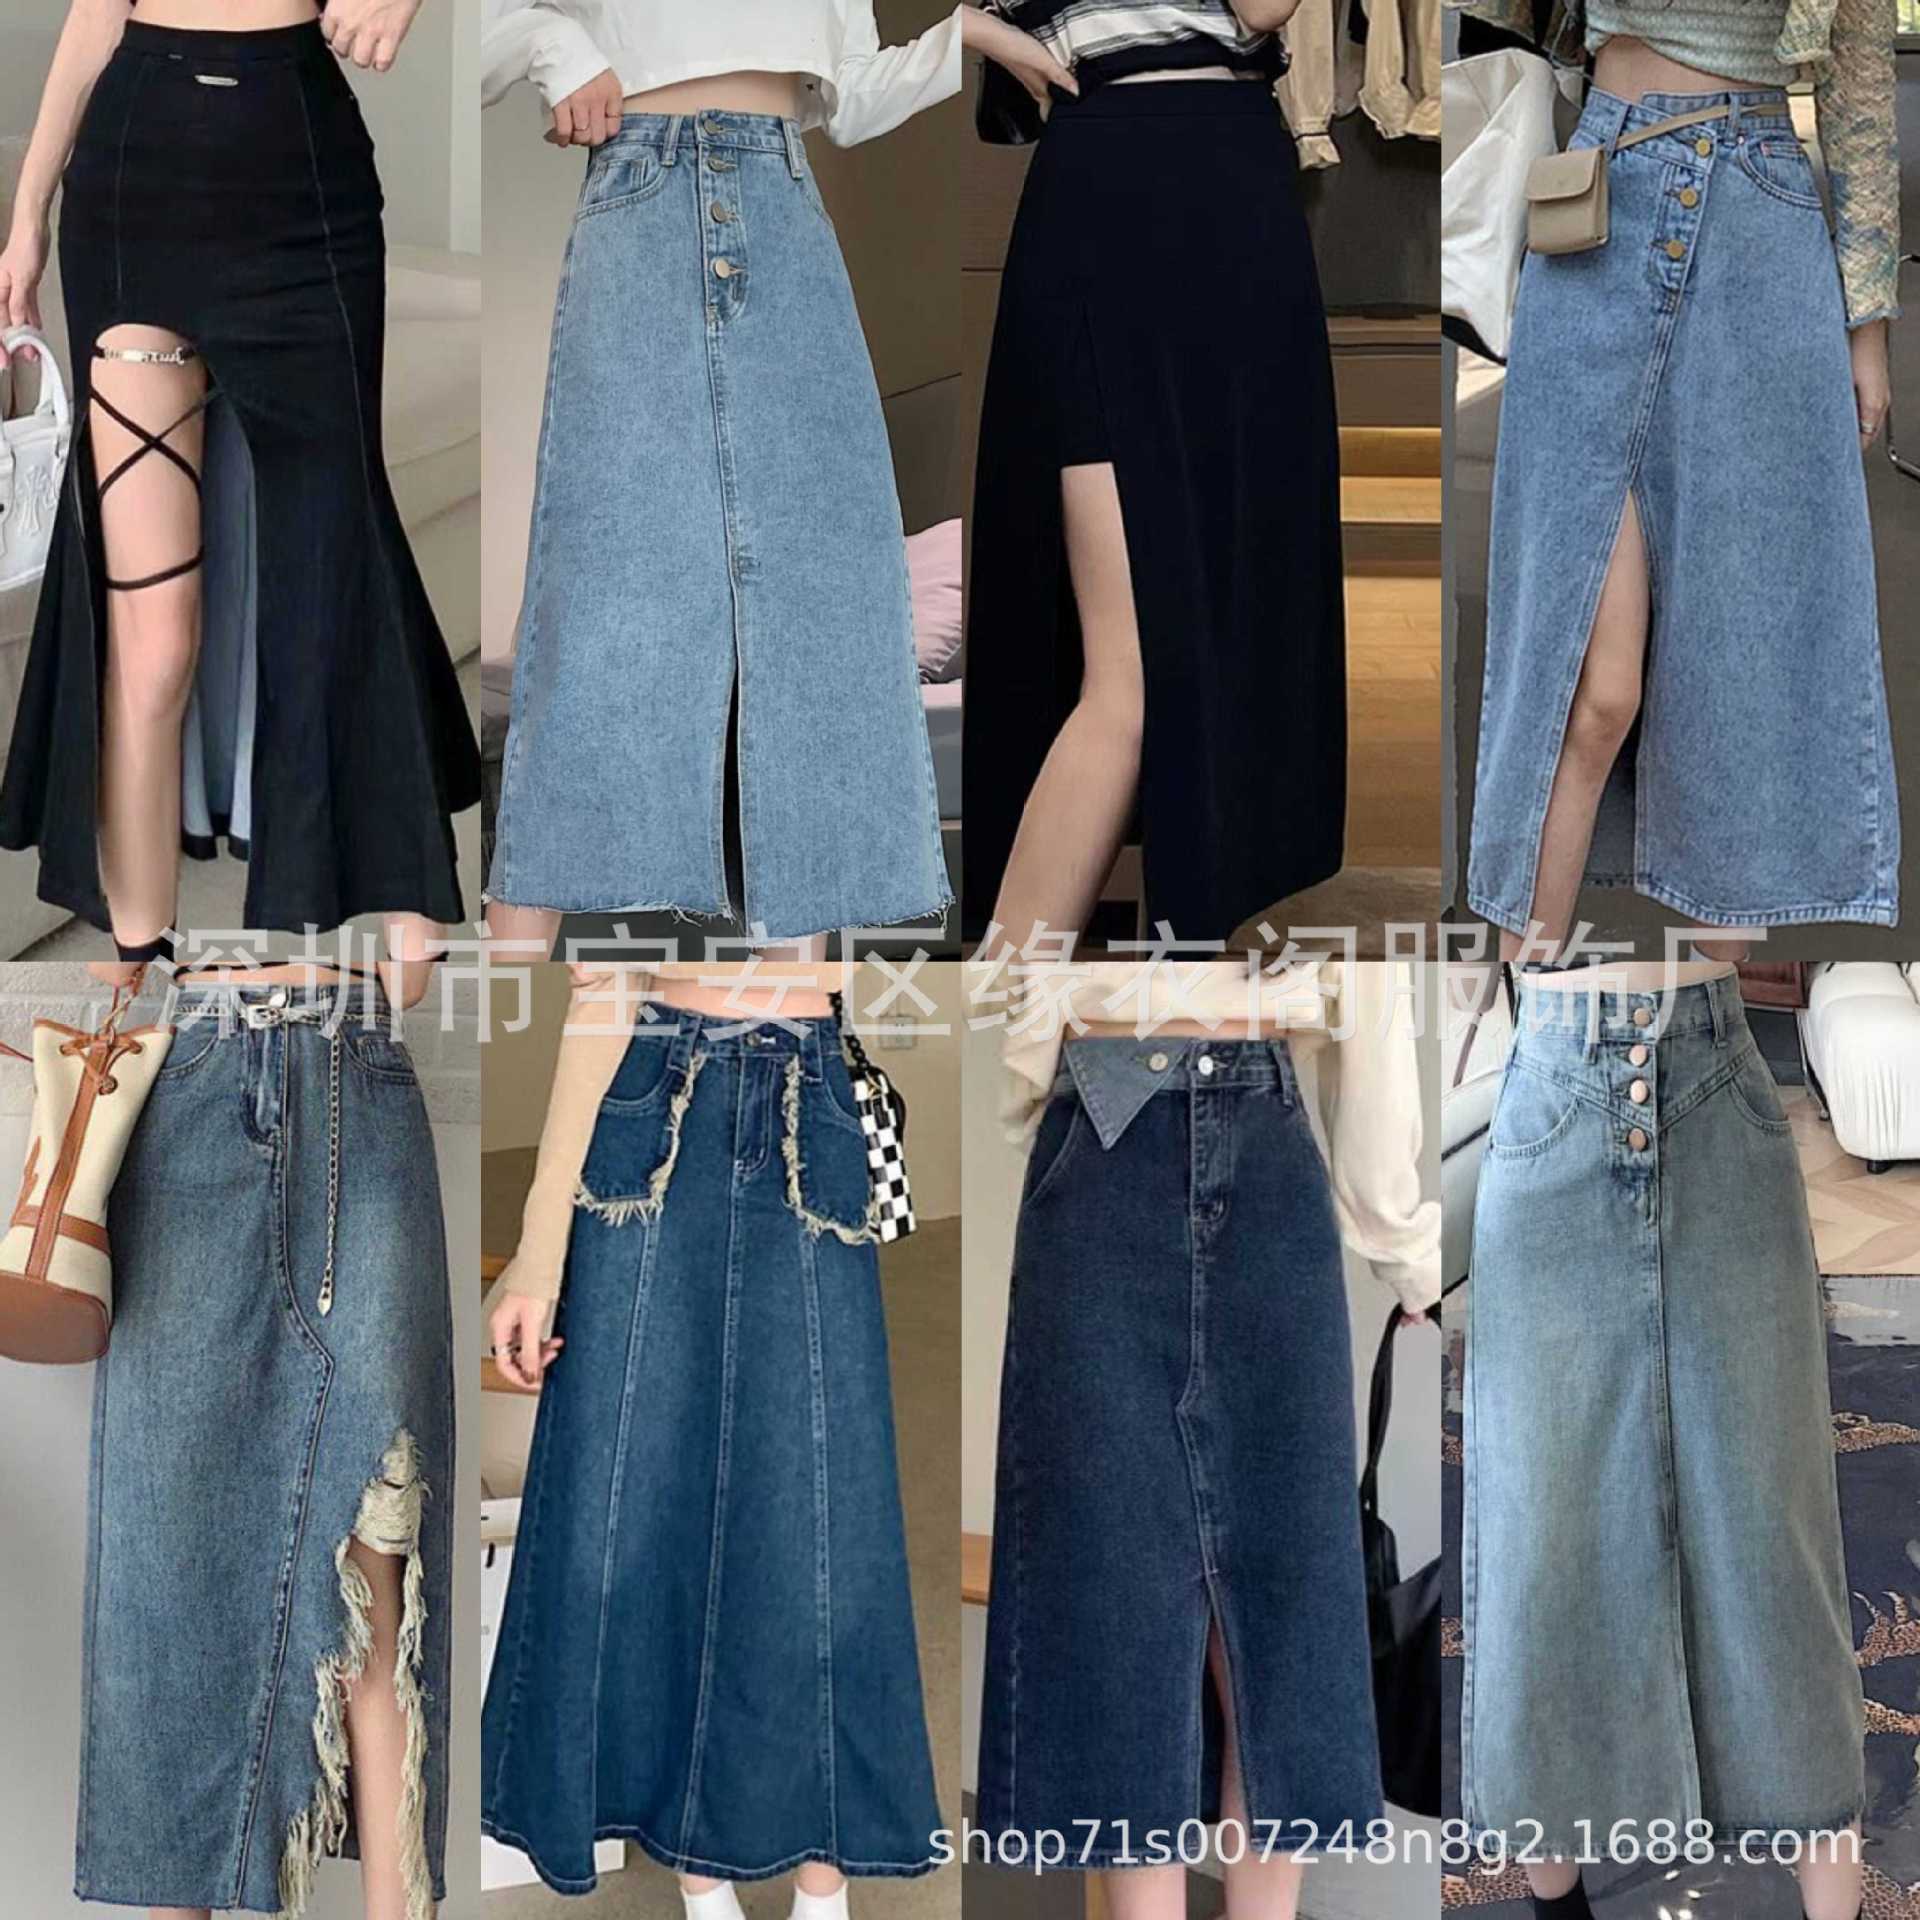 Women‘s Denim Skirt Tail Clearance Miscellaneous Factory Live Broadcast Women‘s Denim foreign Trade Stall Goods Wholesale Supply